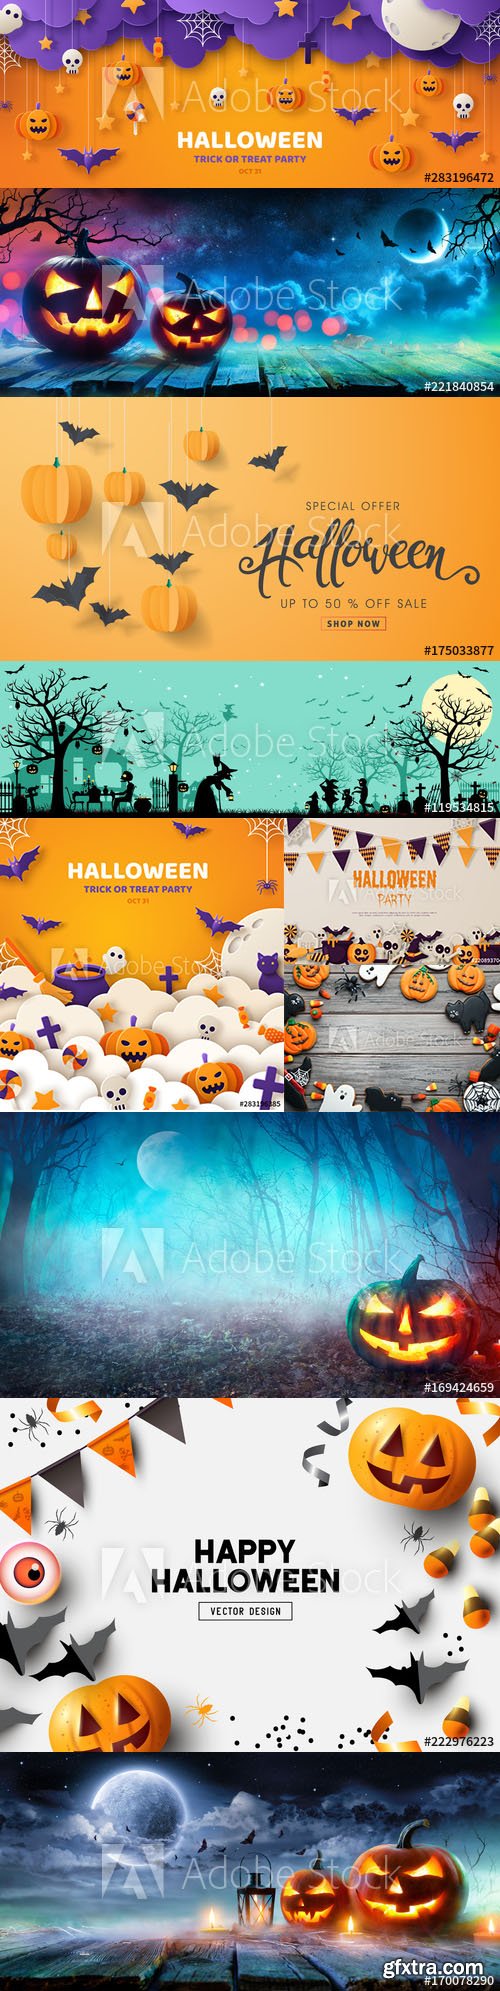 Set of Happy Halloween Background and Elements vol1